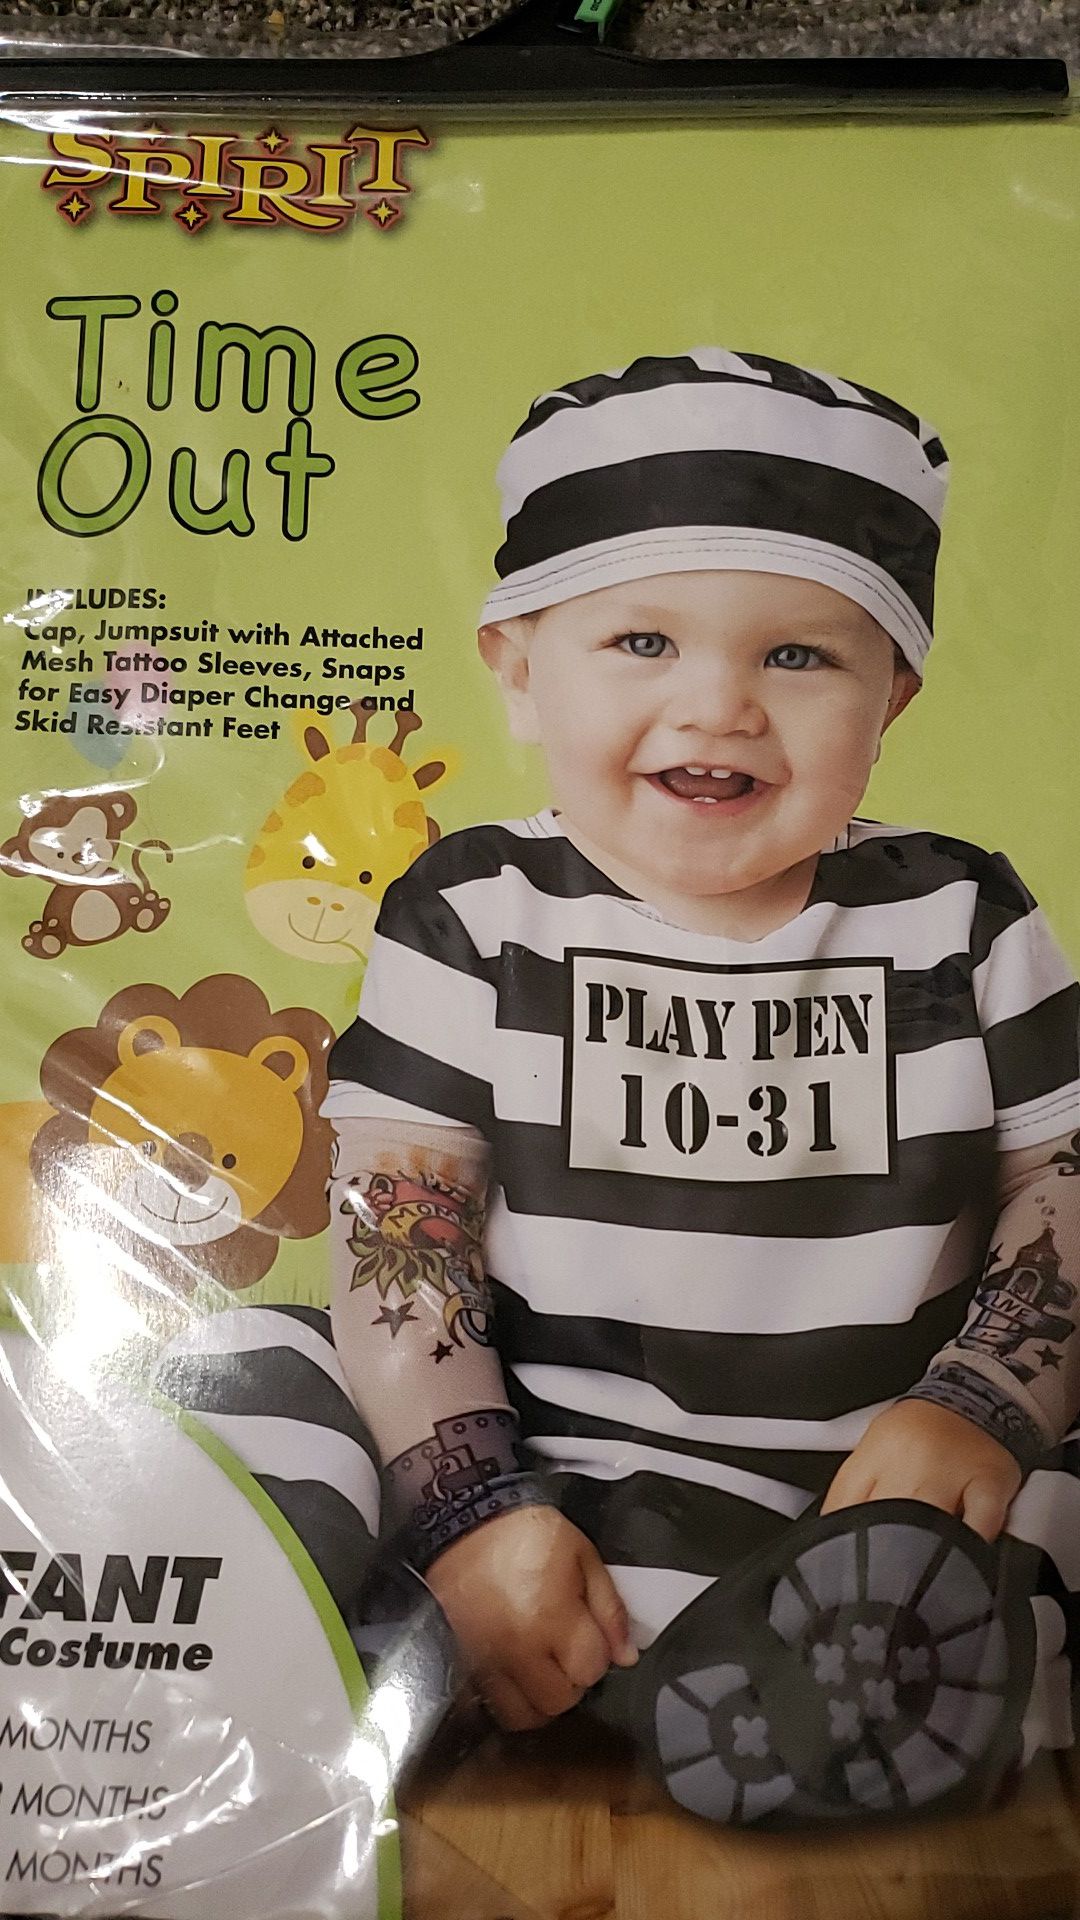 12 to 18 month time out costume. Halloween.